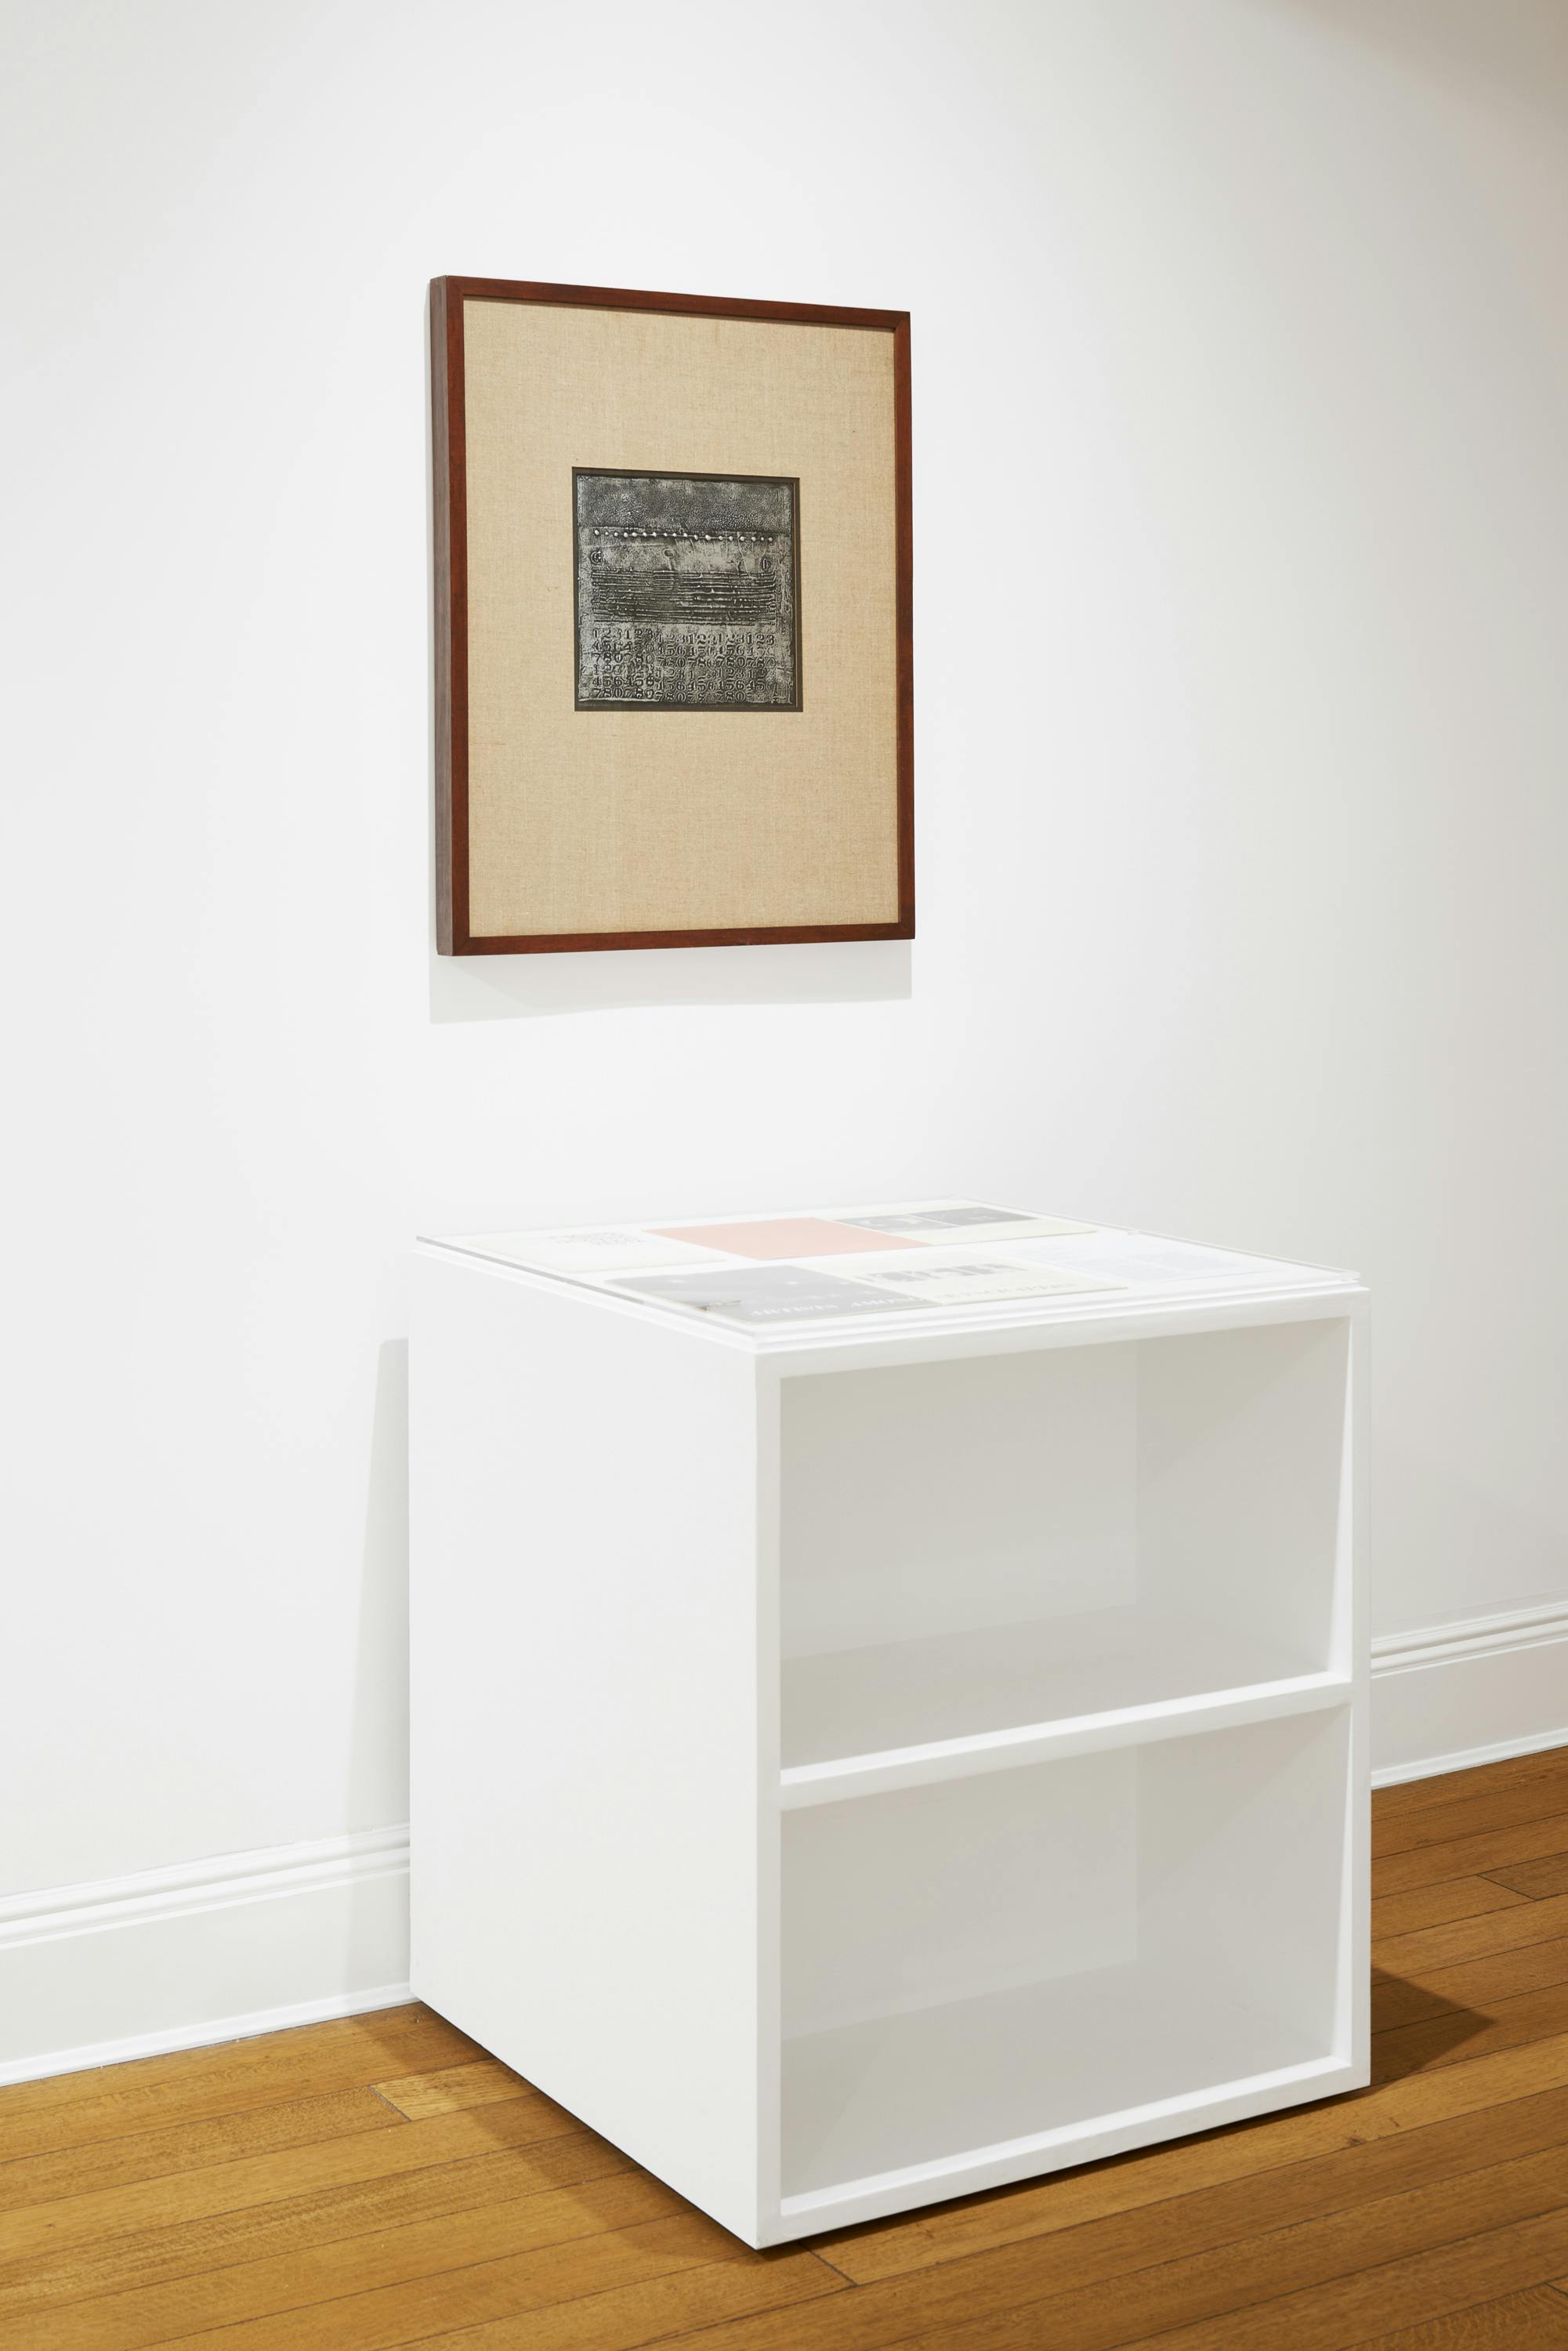 Installation view of a vitrine with a wall-mounted work by José Antonio Fernández-Muro positioned above.